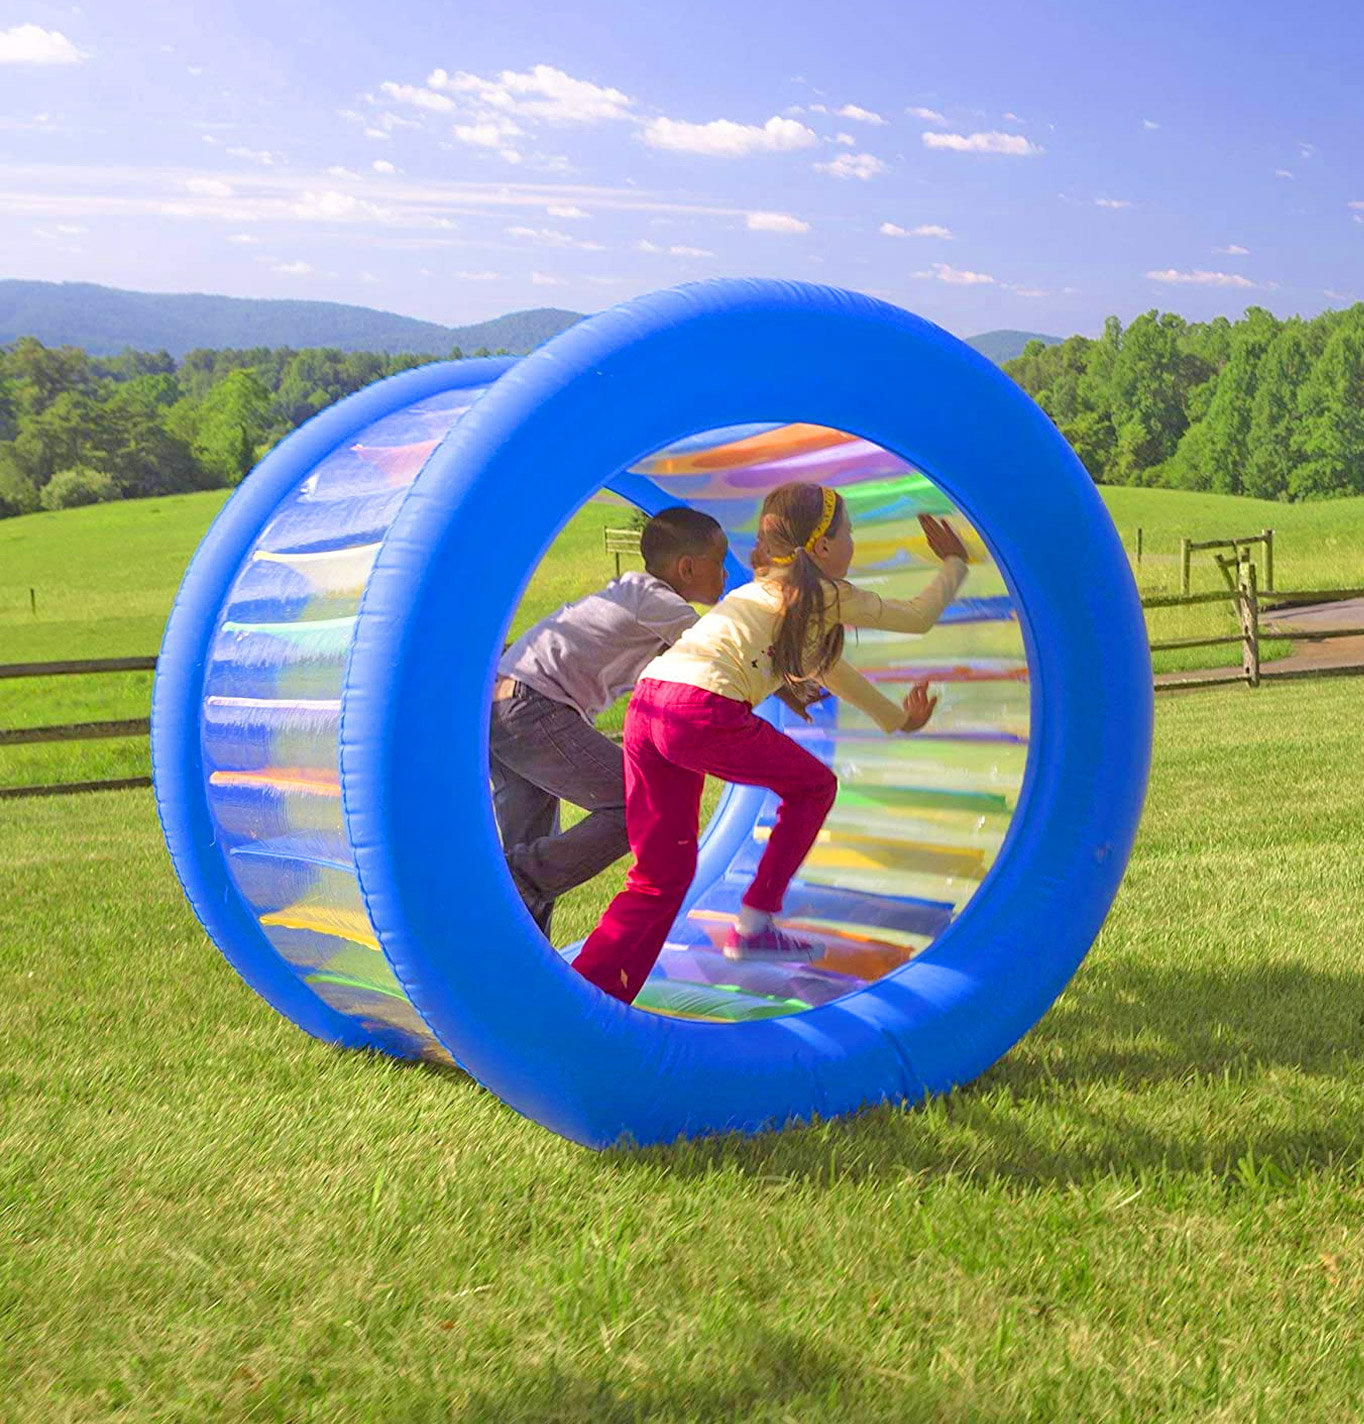 Giant Inflatable Rolling Wheel - Hearthsong Roll With It Giant Rolling Cylinder Toy